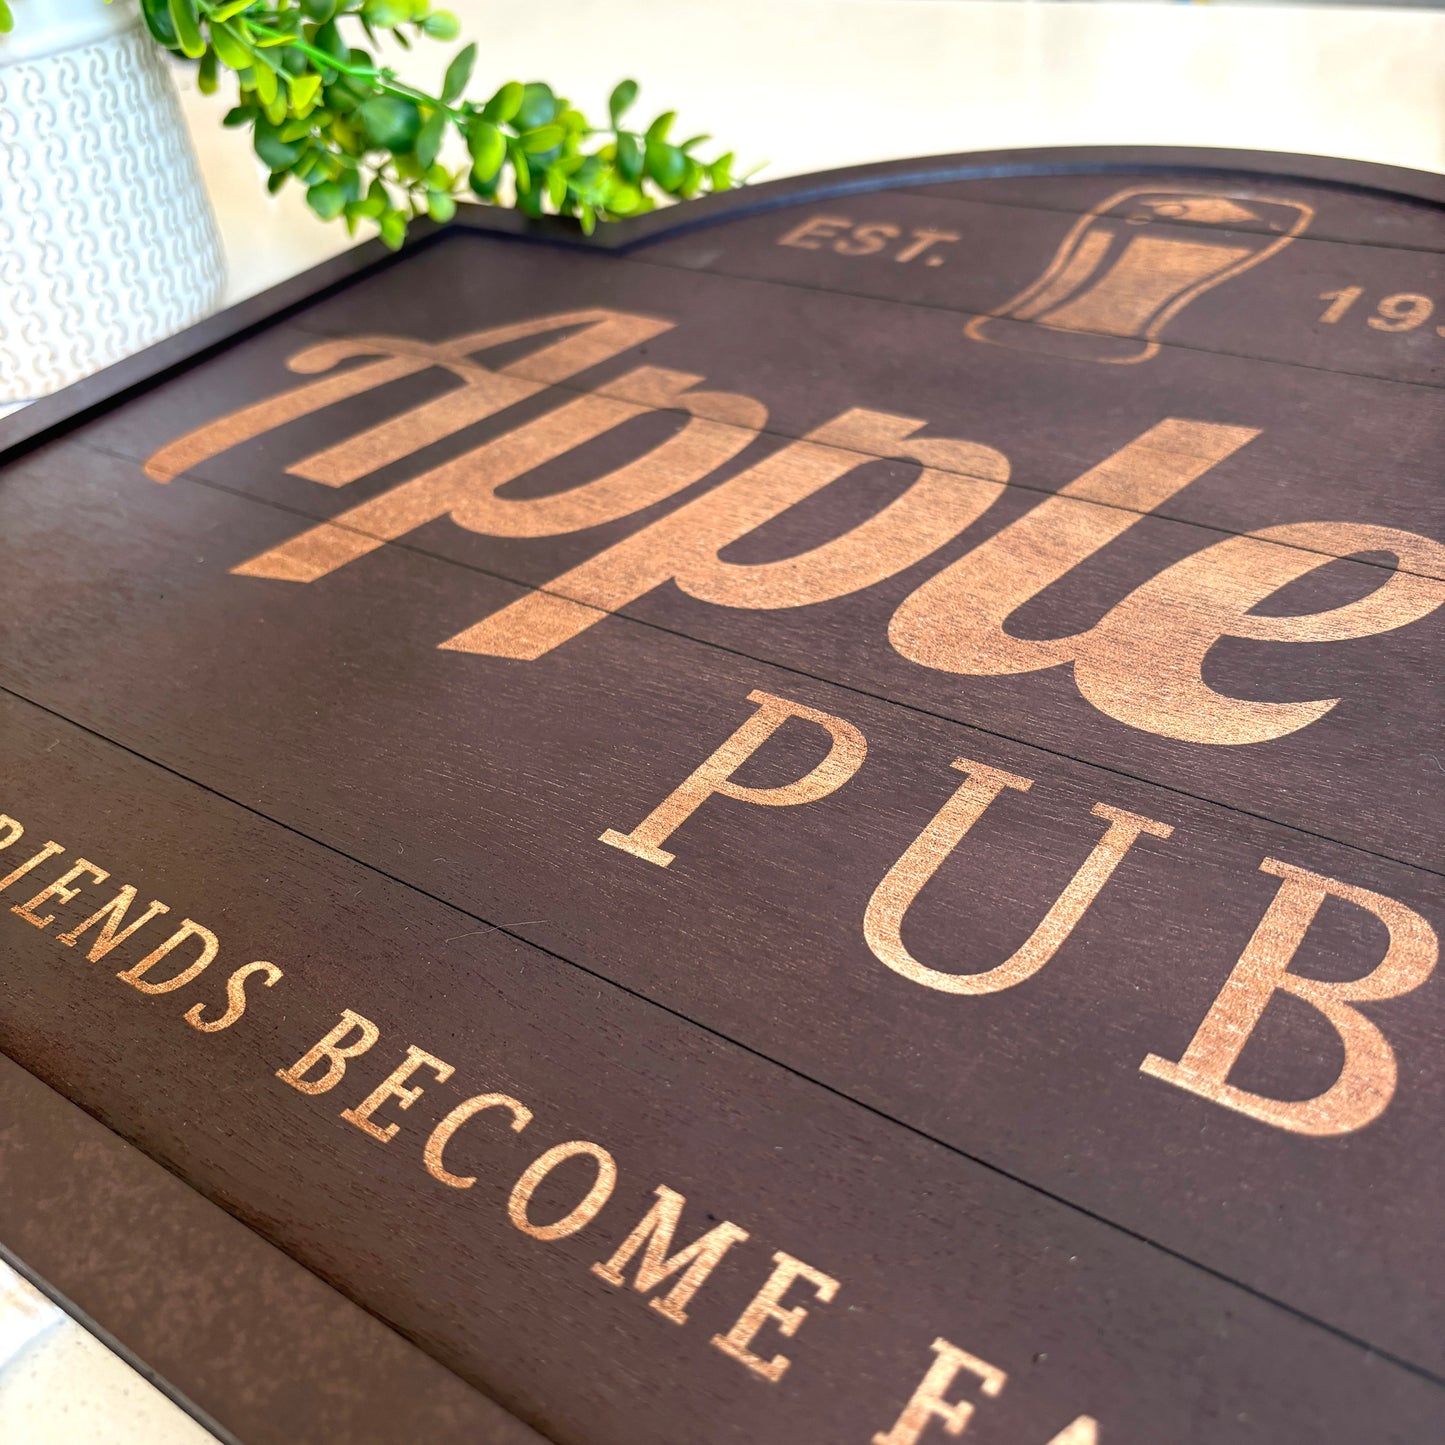 Personalised engraved and slatted wooden Bar Sign